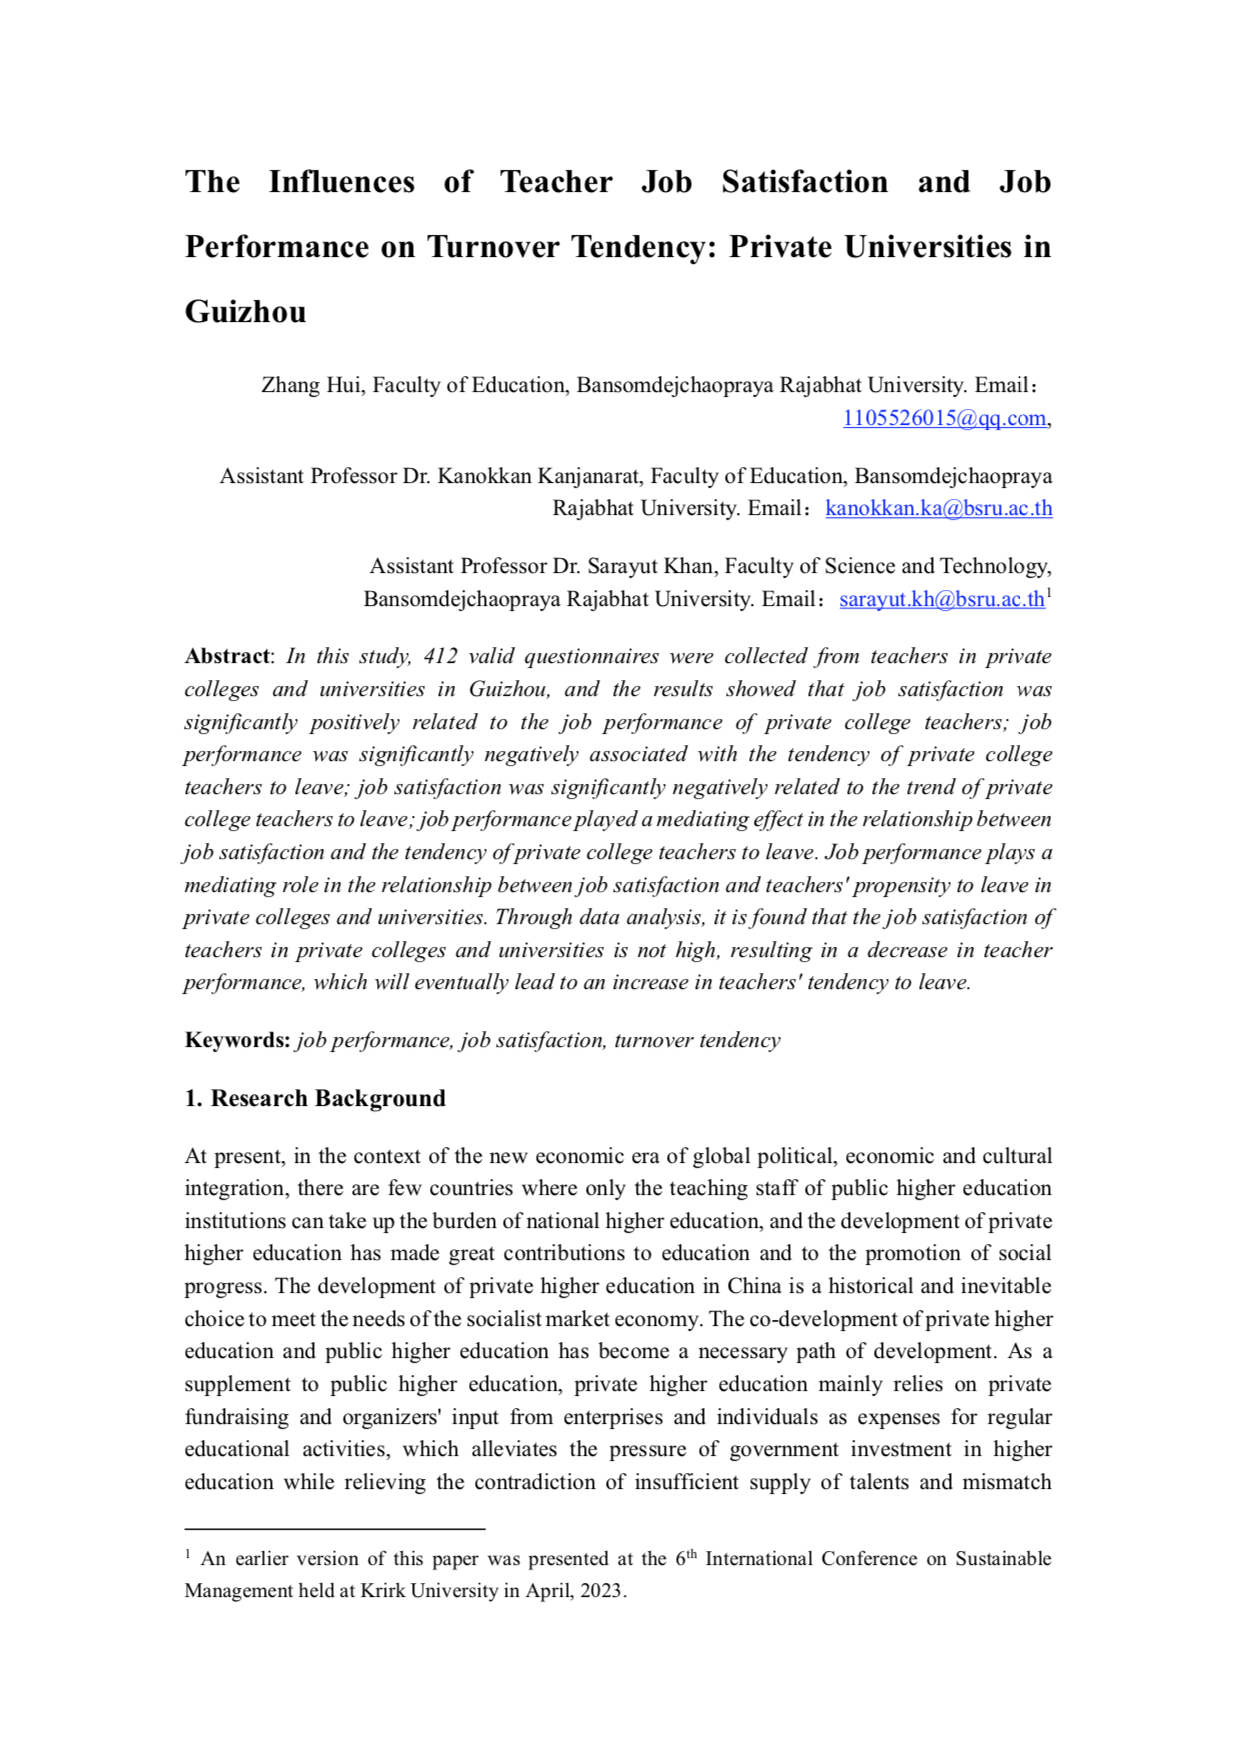 The Influences of Teacher Job Satisfaction and Job Performance on Turnover Tendency: Private Universities in Guizhou